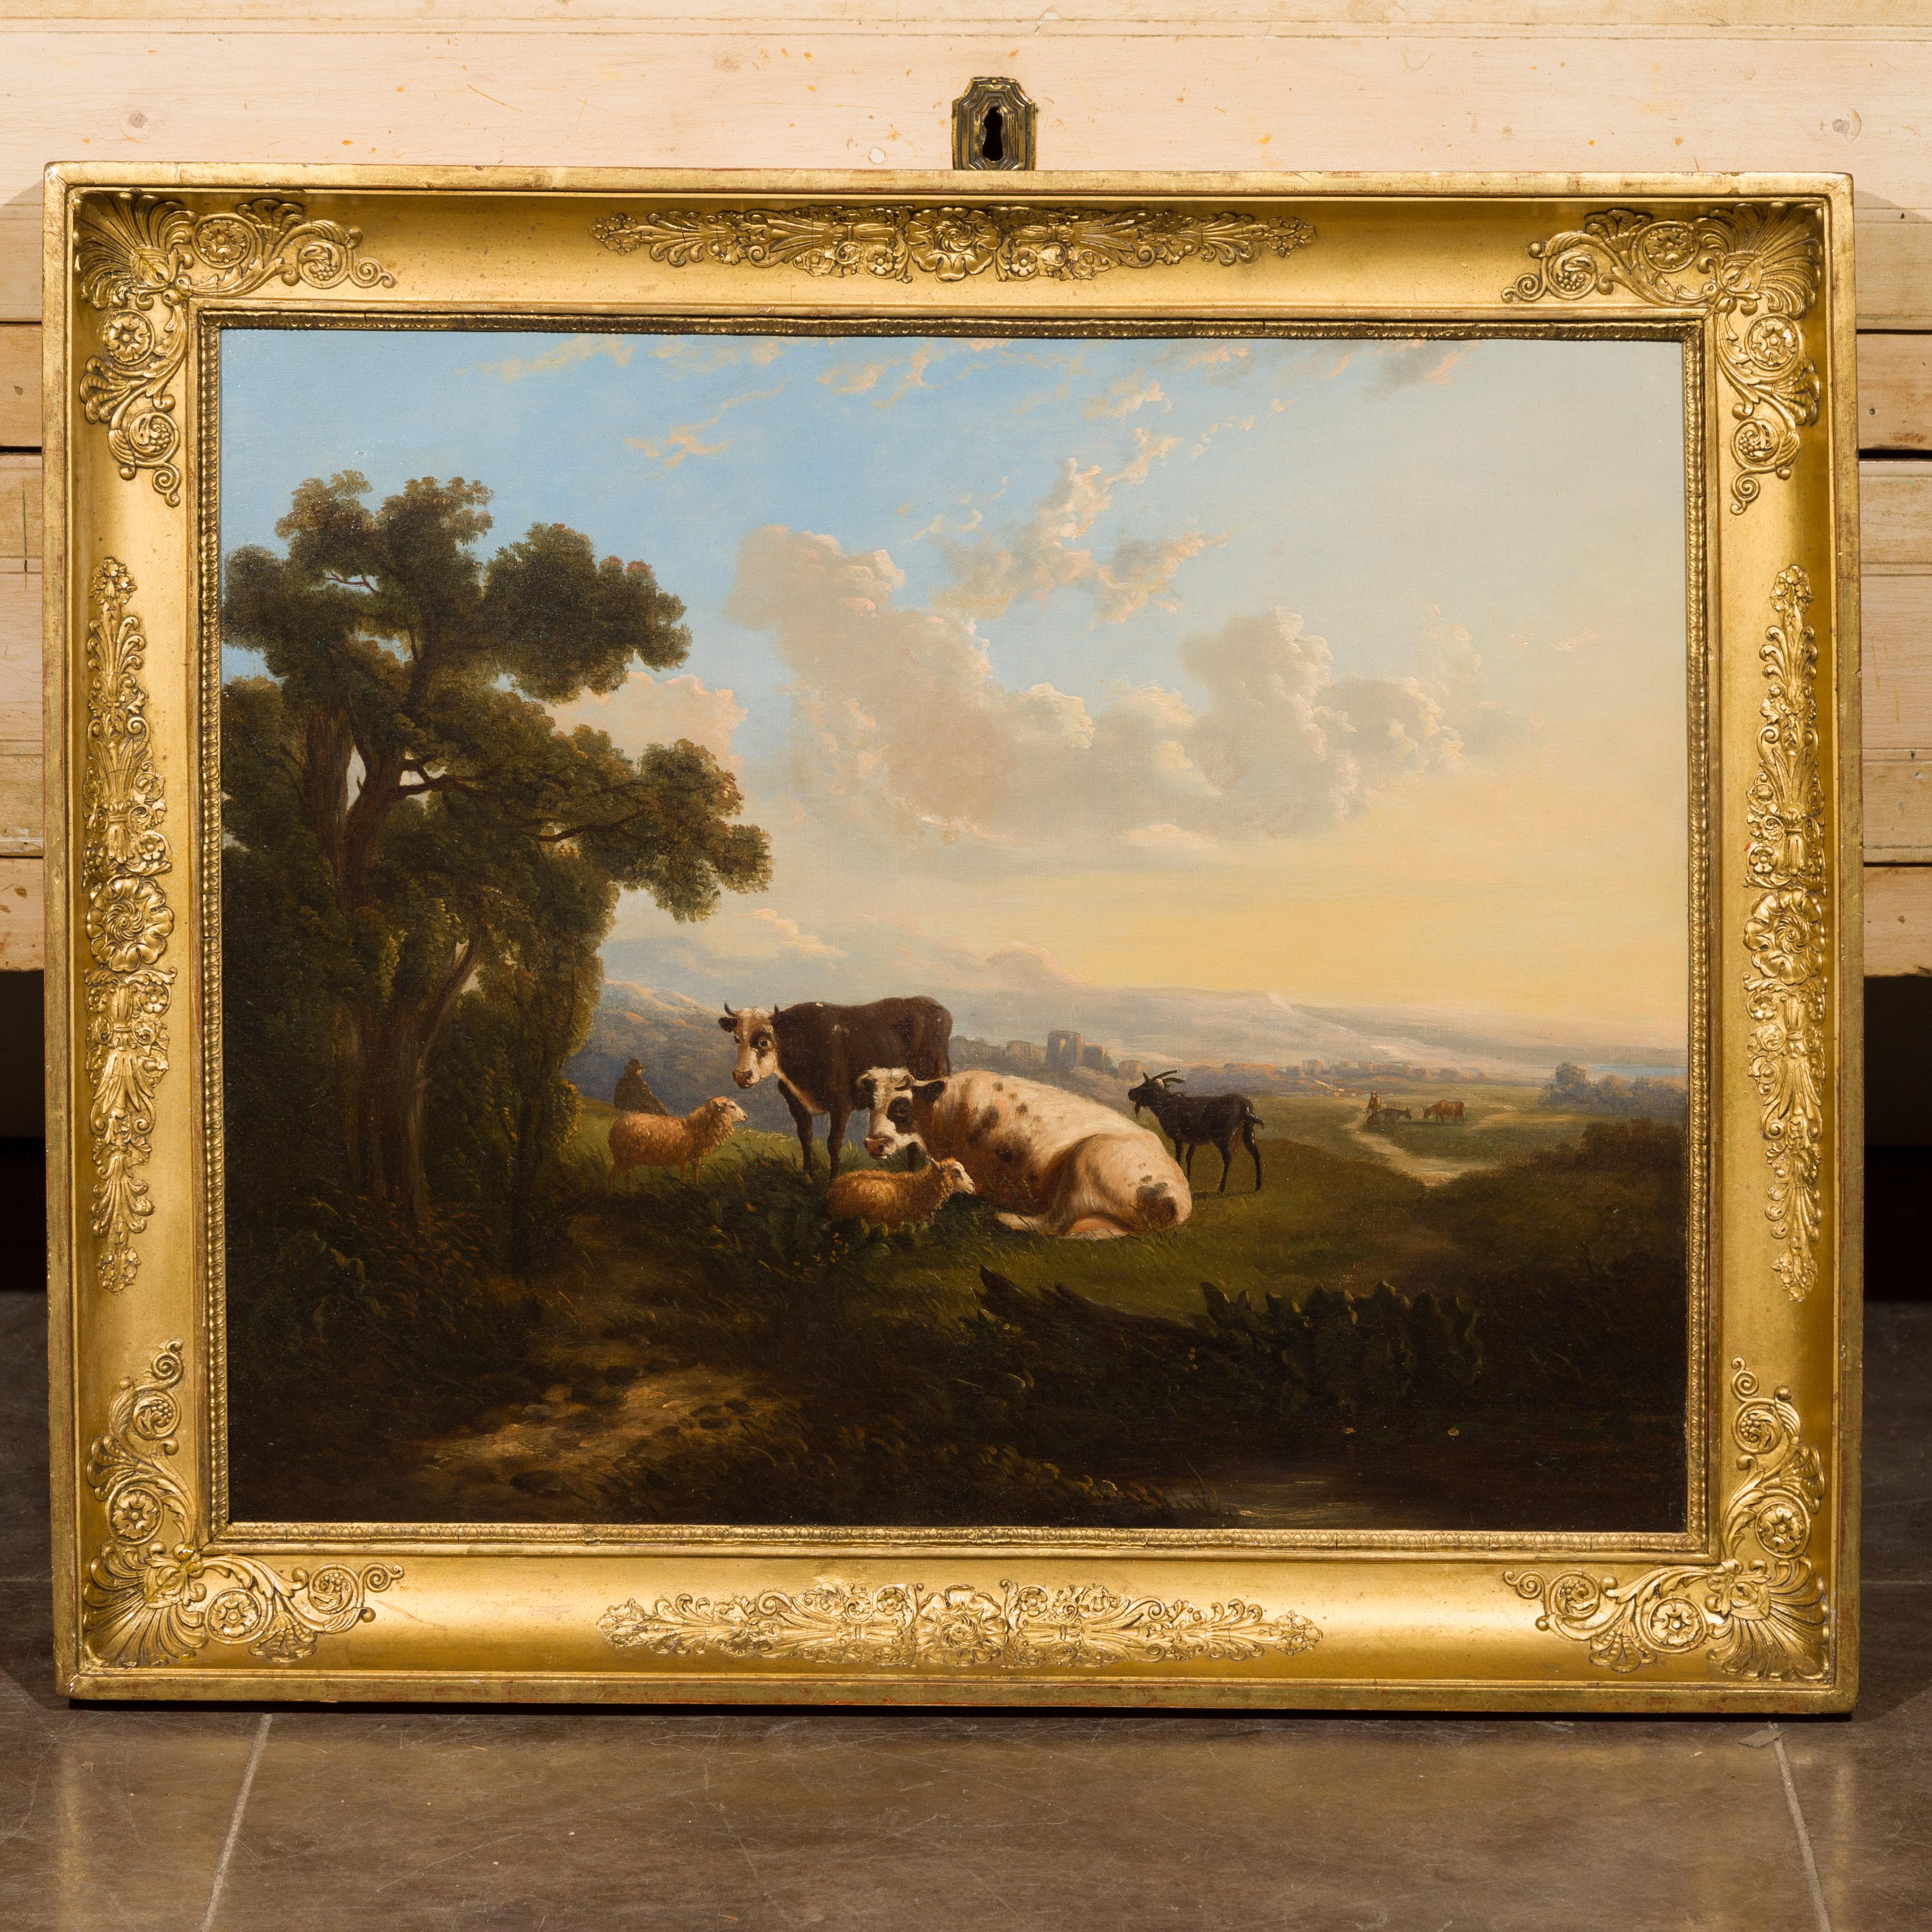 An Italian oil on canvas painting from the mid-19th century depicting cows, sheep and goats in pastures, in antique giltwood frame. Created in Italy during the third quarter of the 19th century, this horizontal oil on canvas painting depicts two